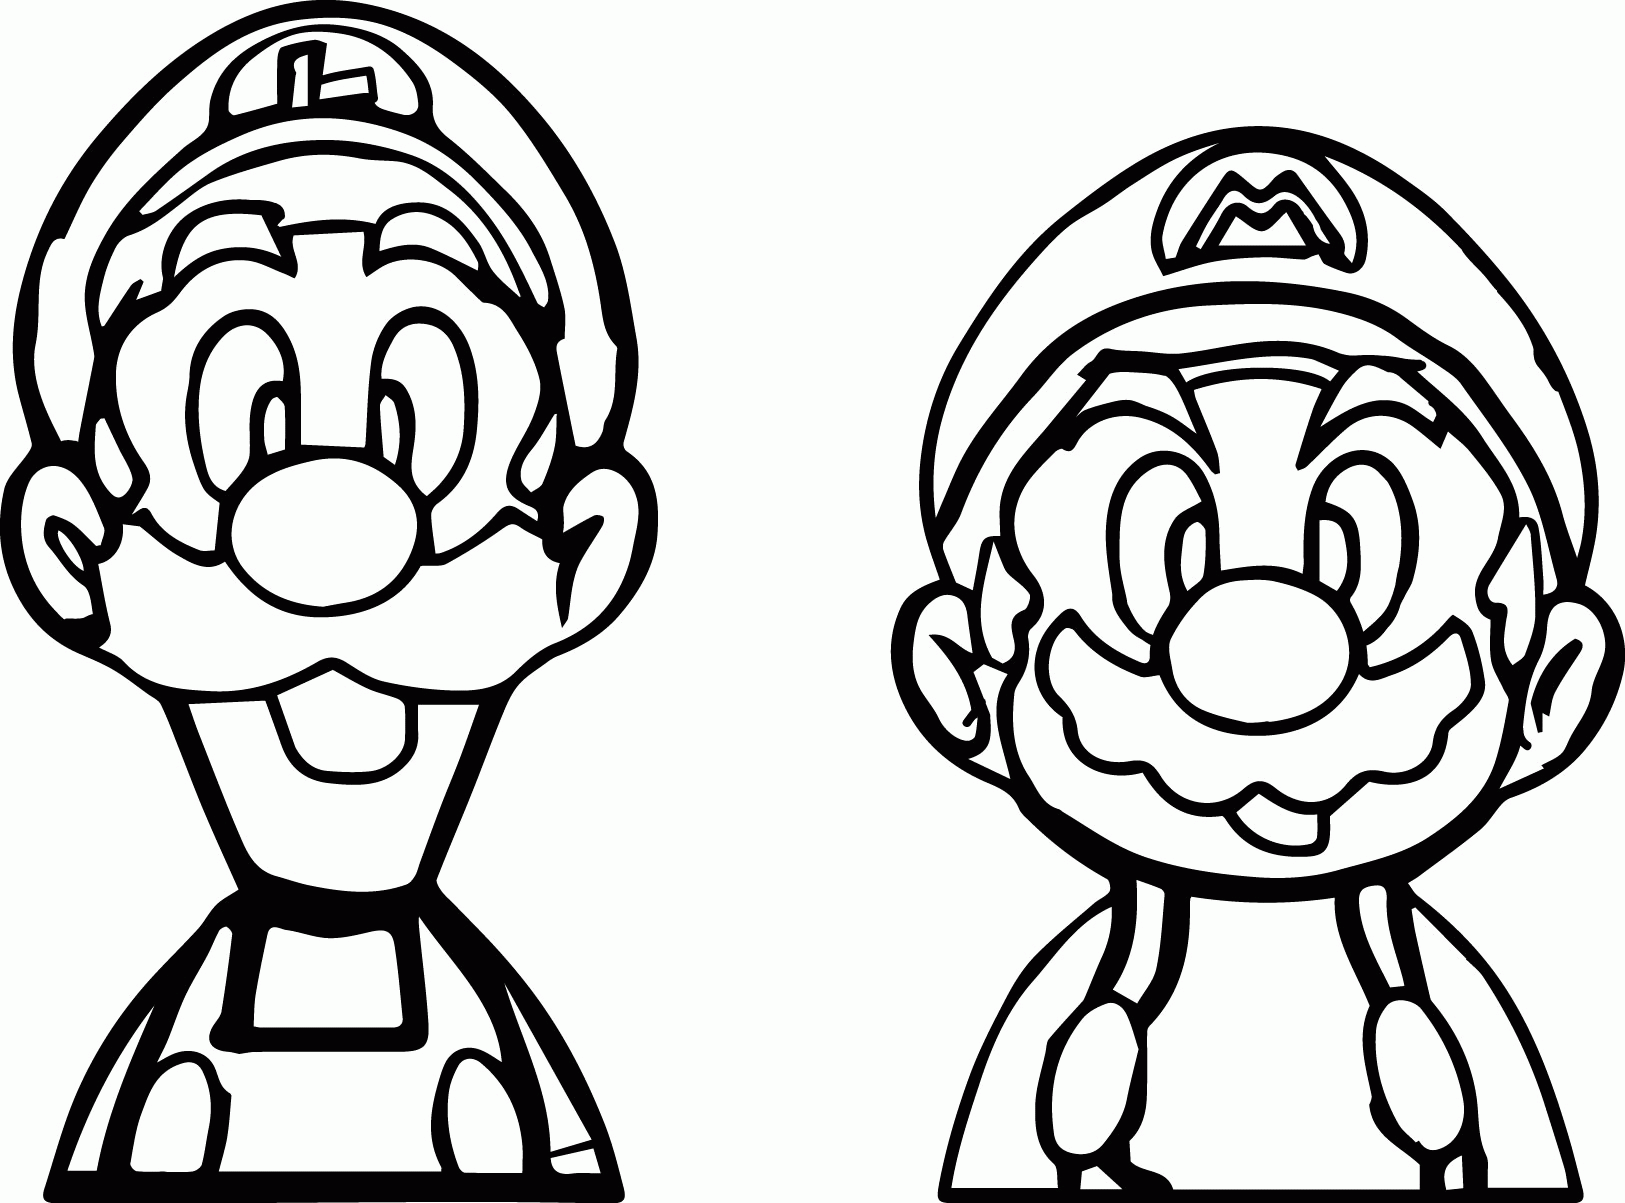 Download Super Mario Bros Characters Coloring Pages - Coloring Home